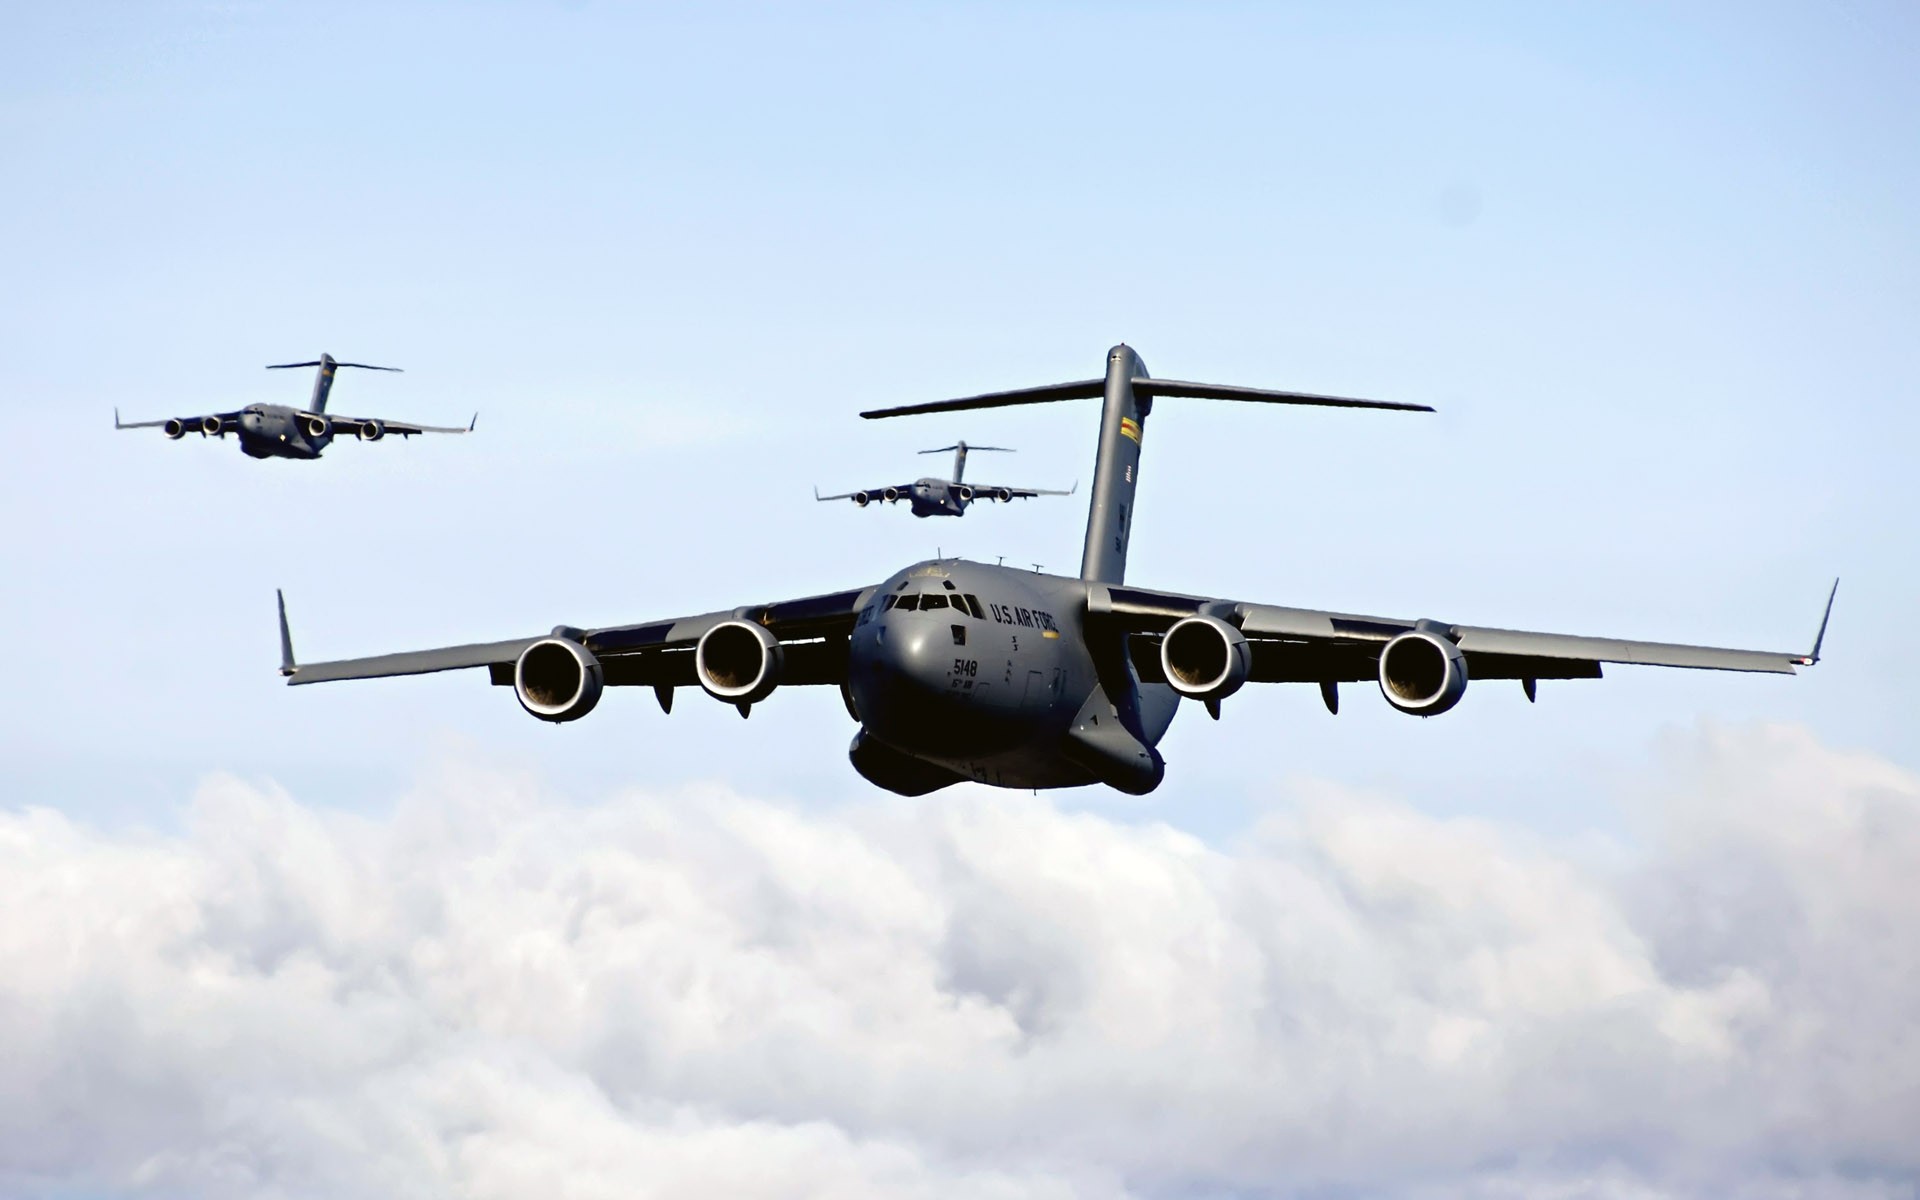 General 1920x1200 airplane military military vehicle aircraft military aircraft vehicle Boeing C-17 Globemaster III American aircraft US Air Force